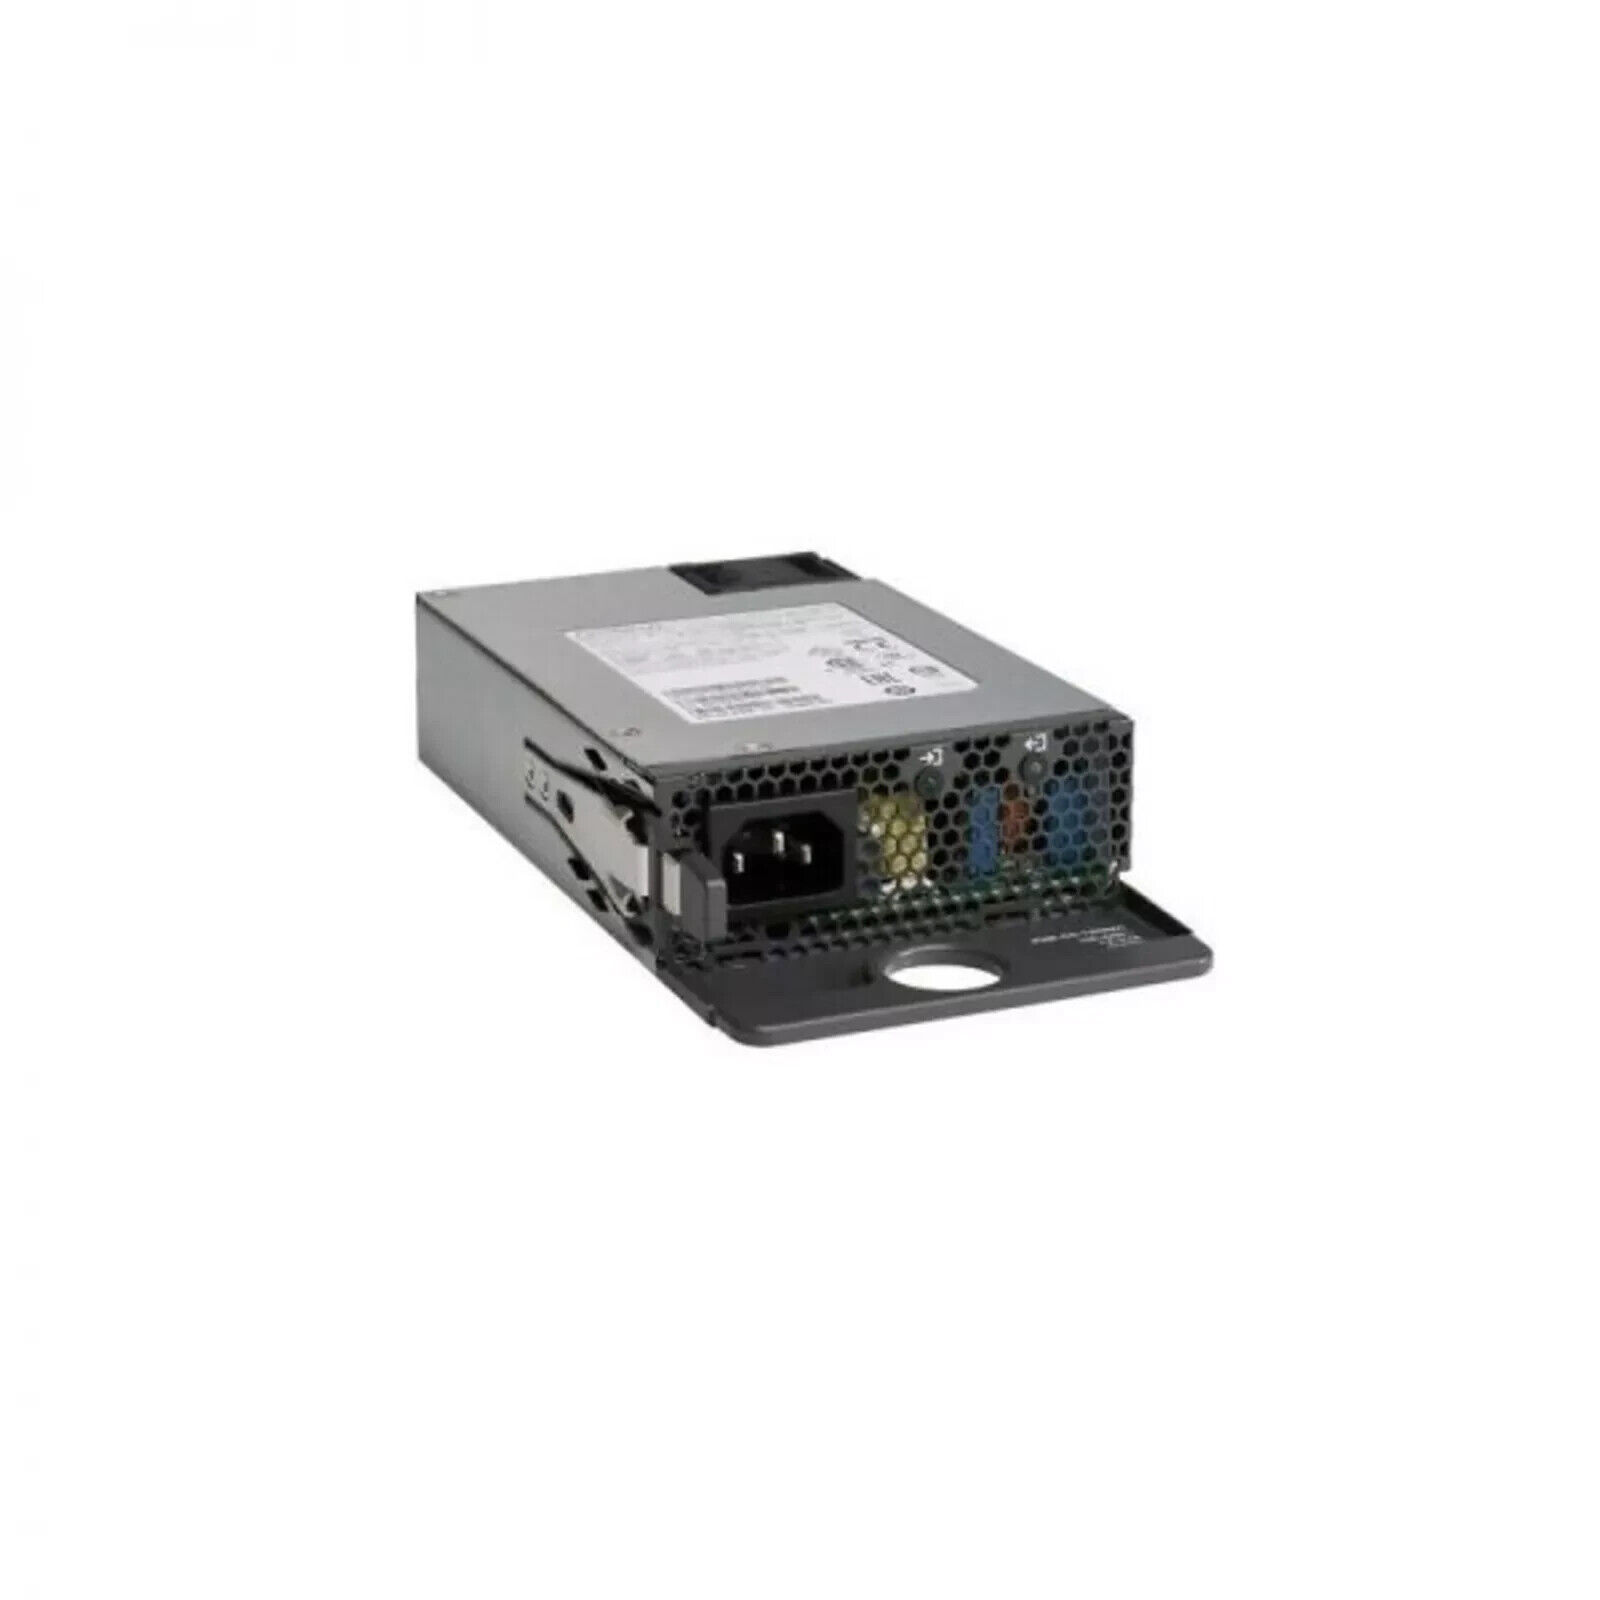 PWR-C6-125WAC - Cisco 125-Watts AC Power Supply for Catalyst 9000 Series Switch